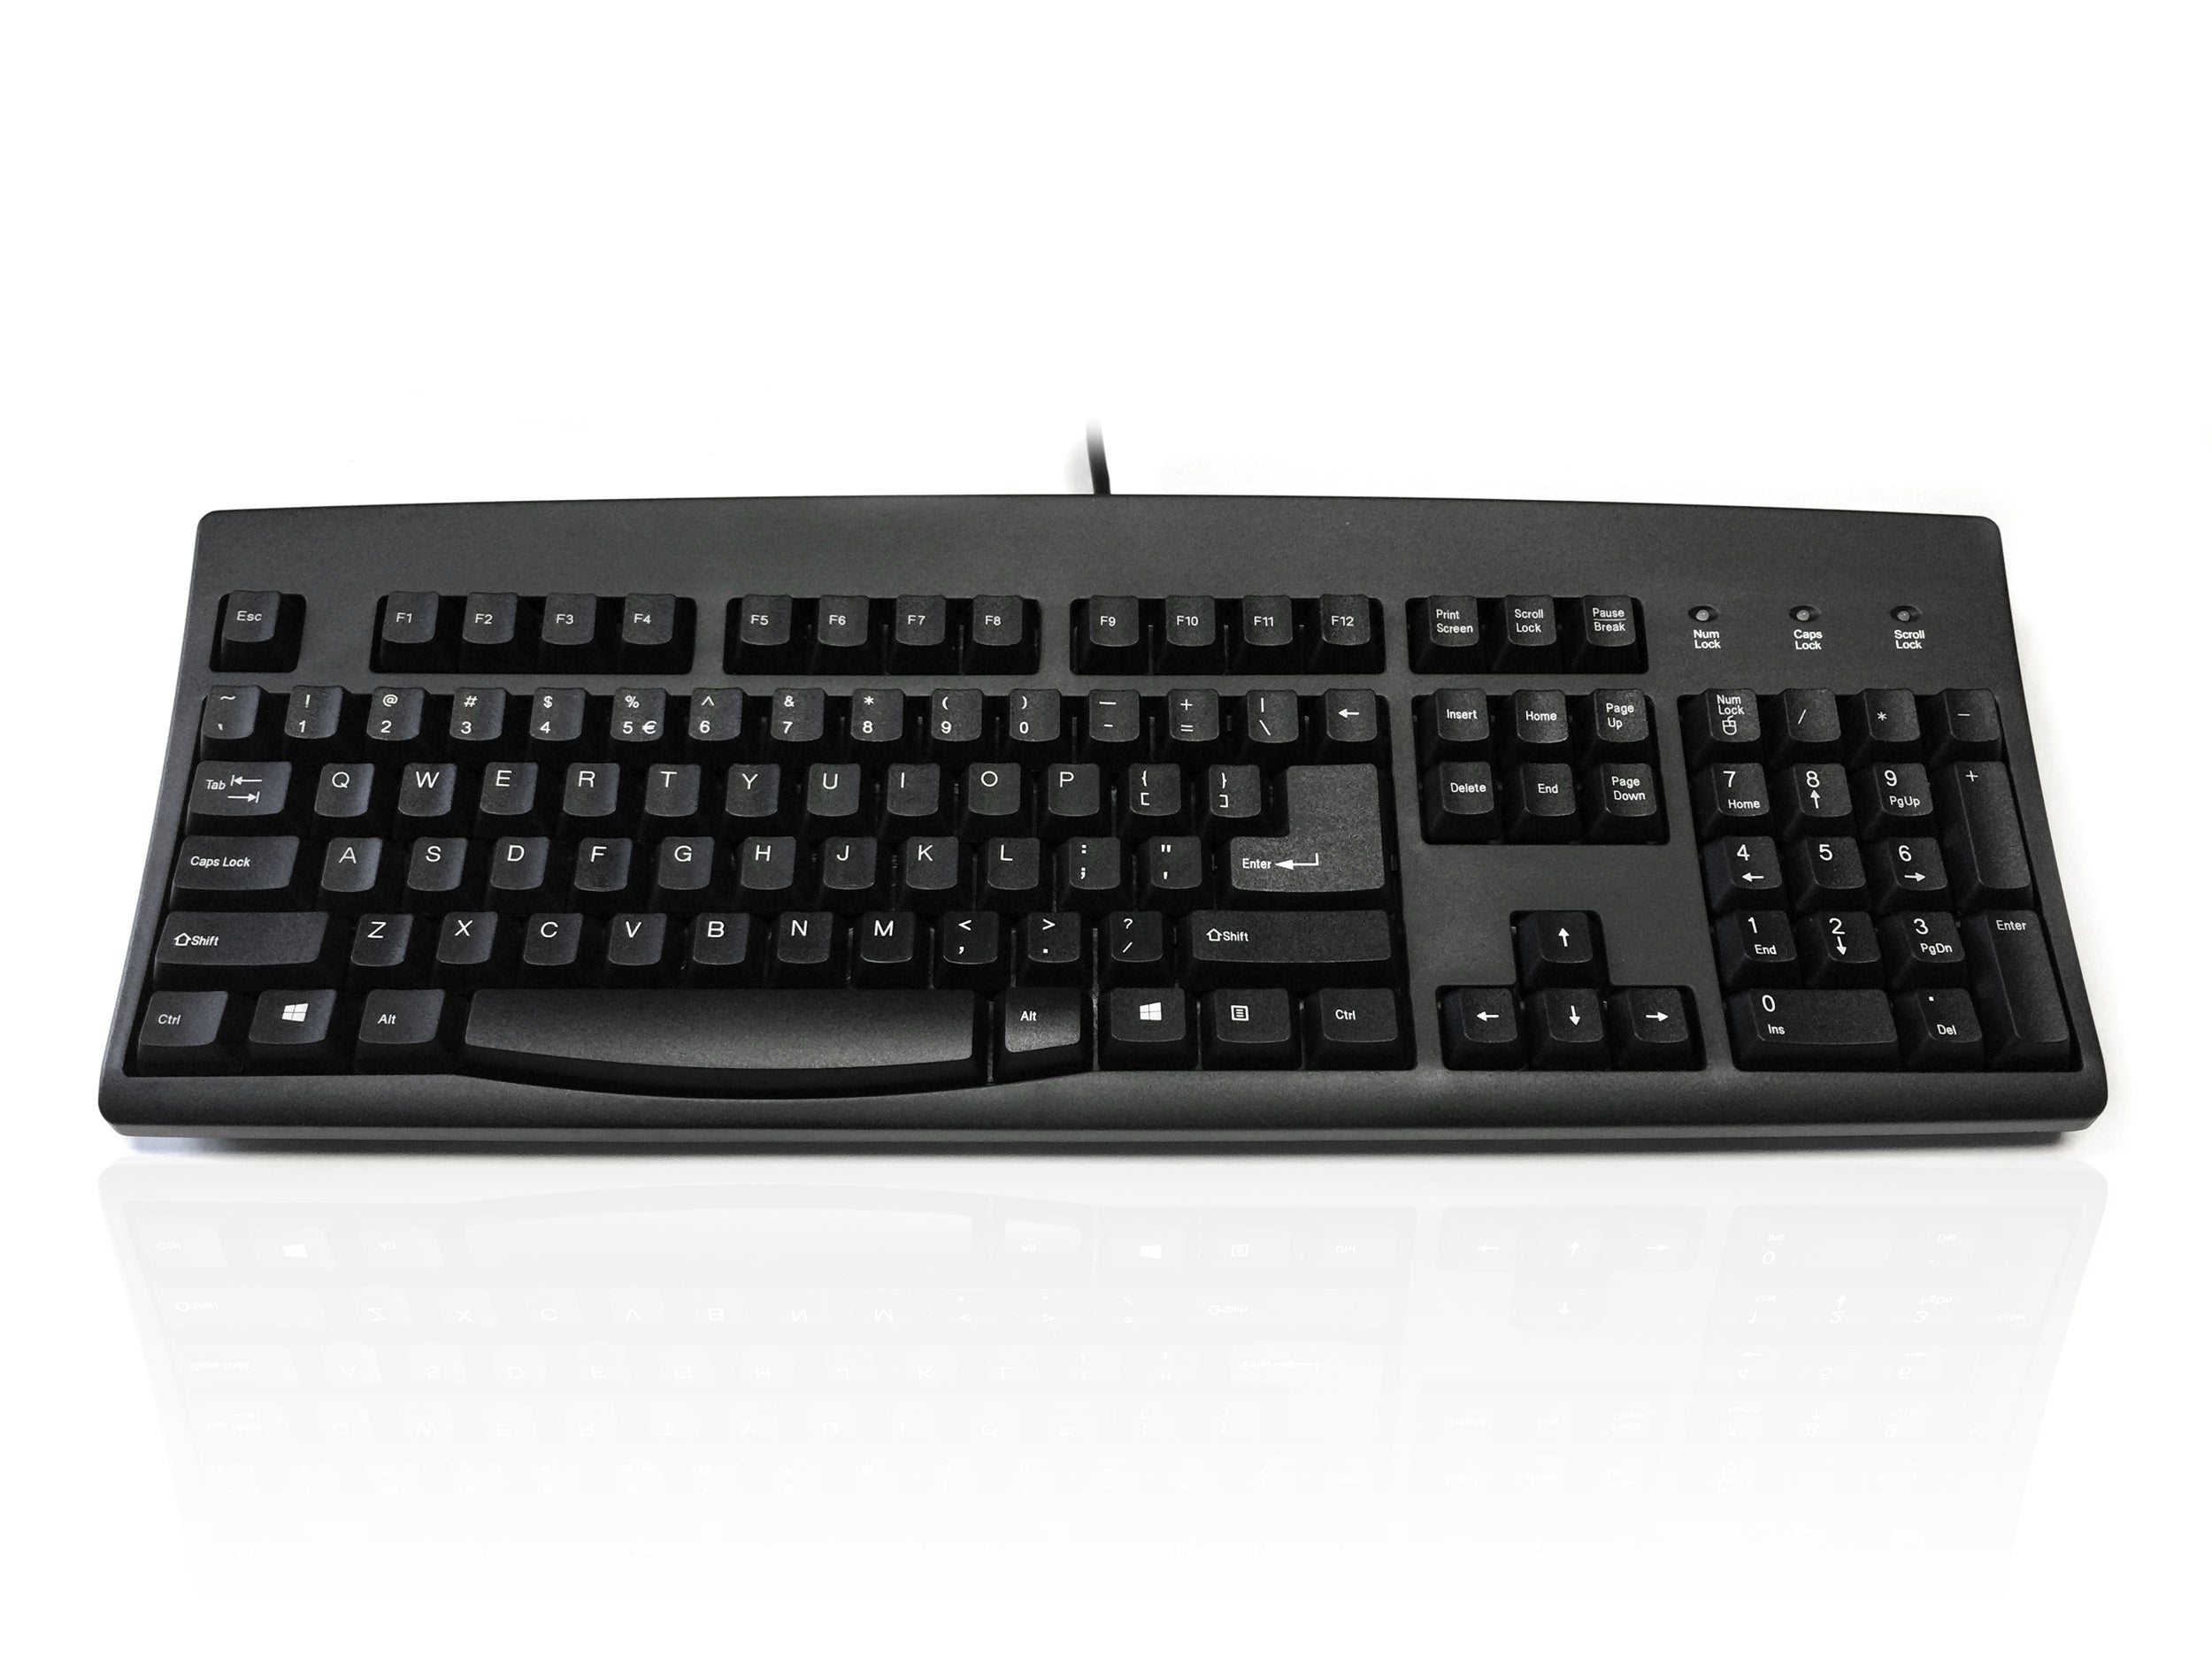 Accuratus 260 - PS/2 Full Size Professional Keyboard with Contoured Full Height Touch Typing Keys & Patented One Touch Euro Key